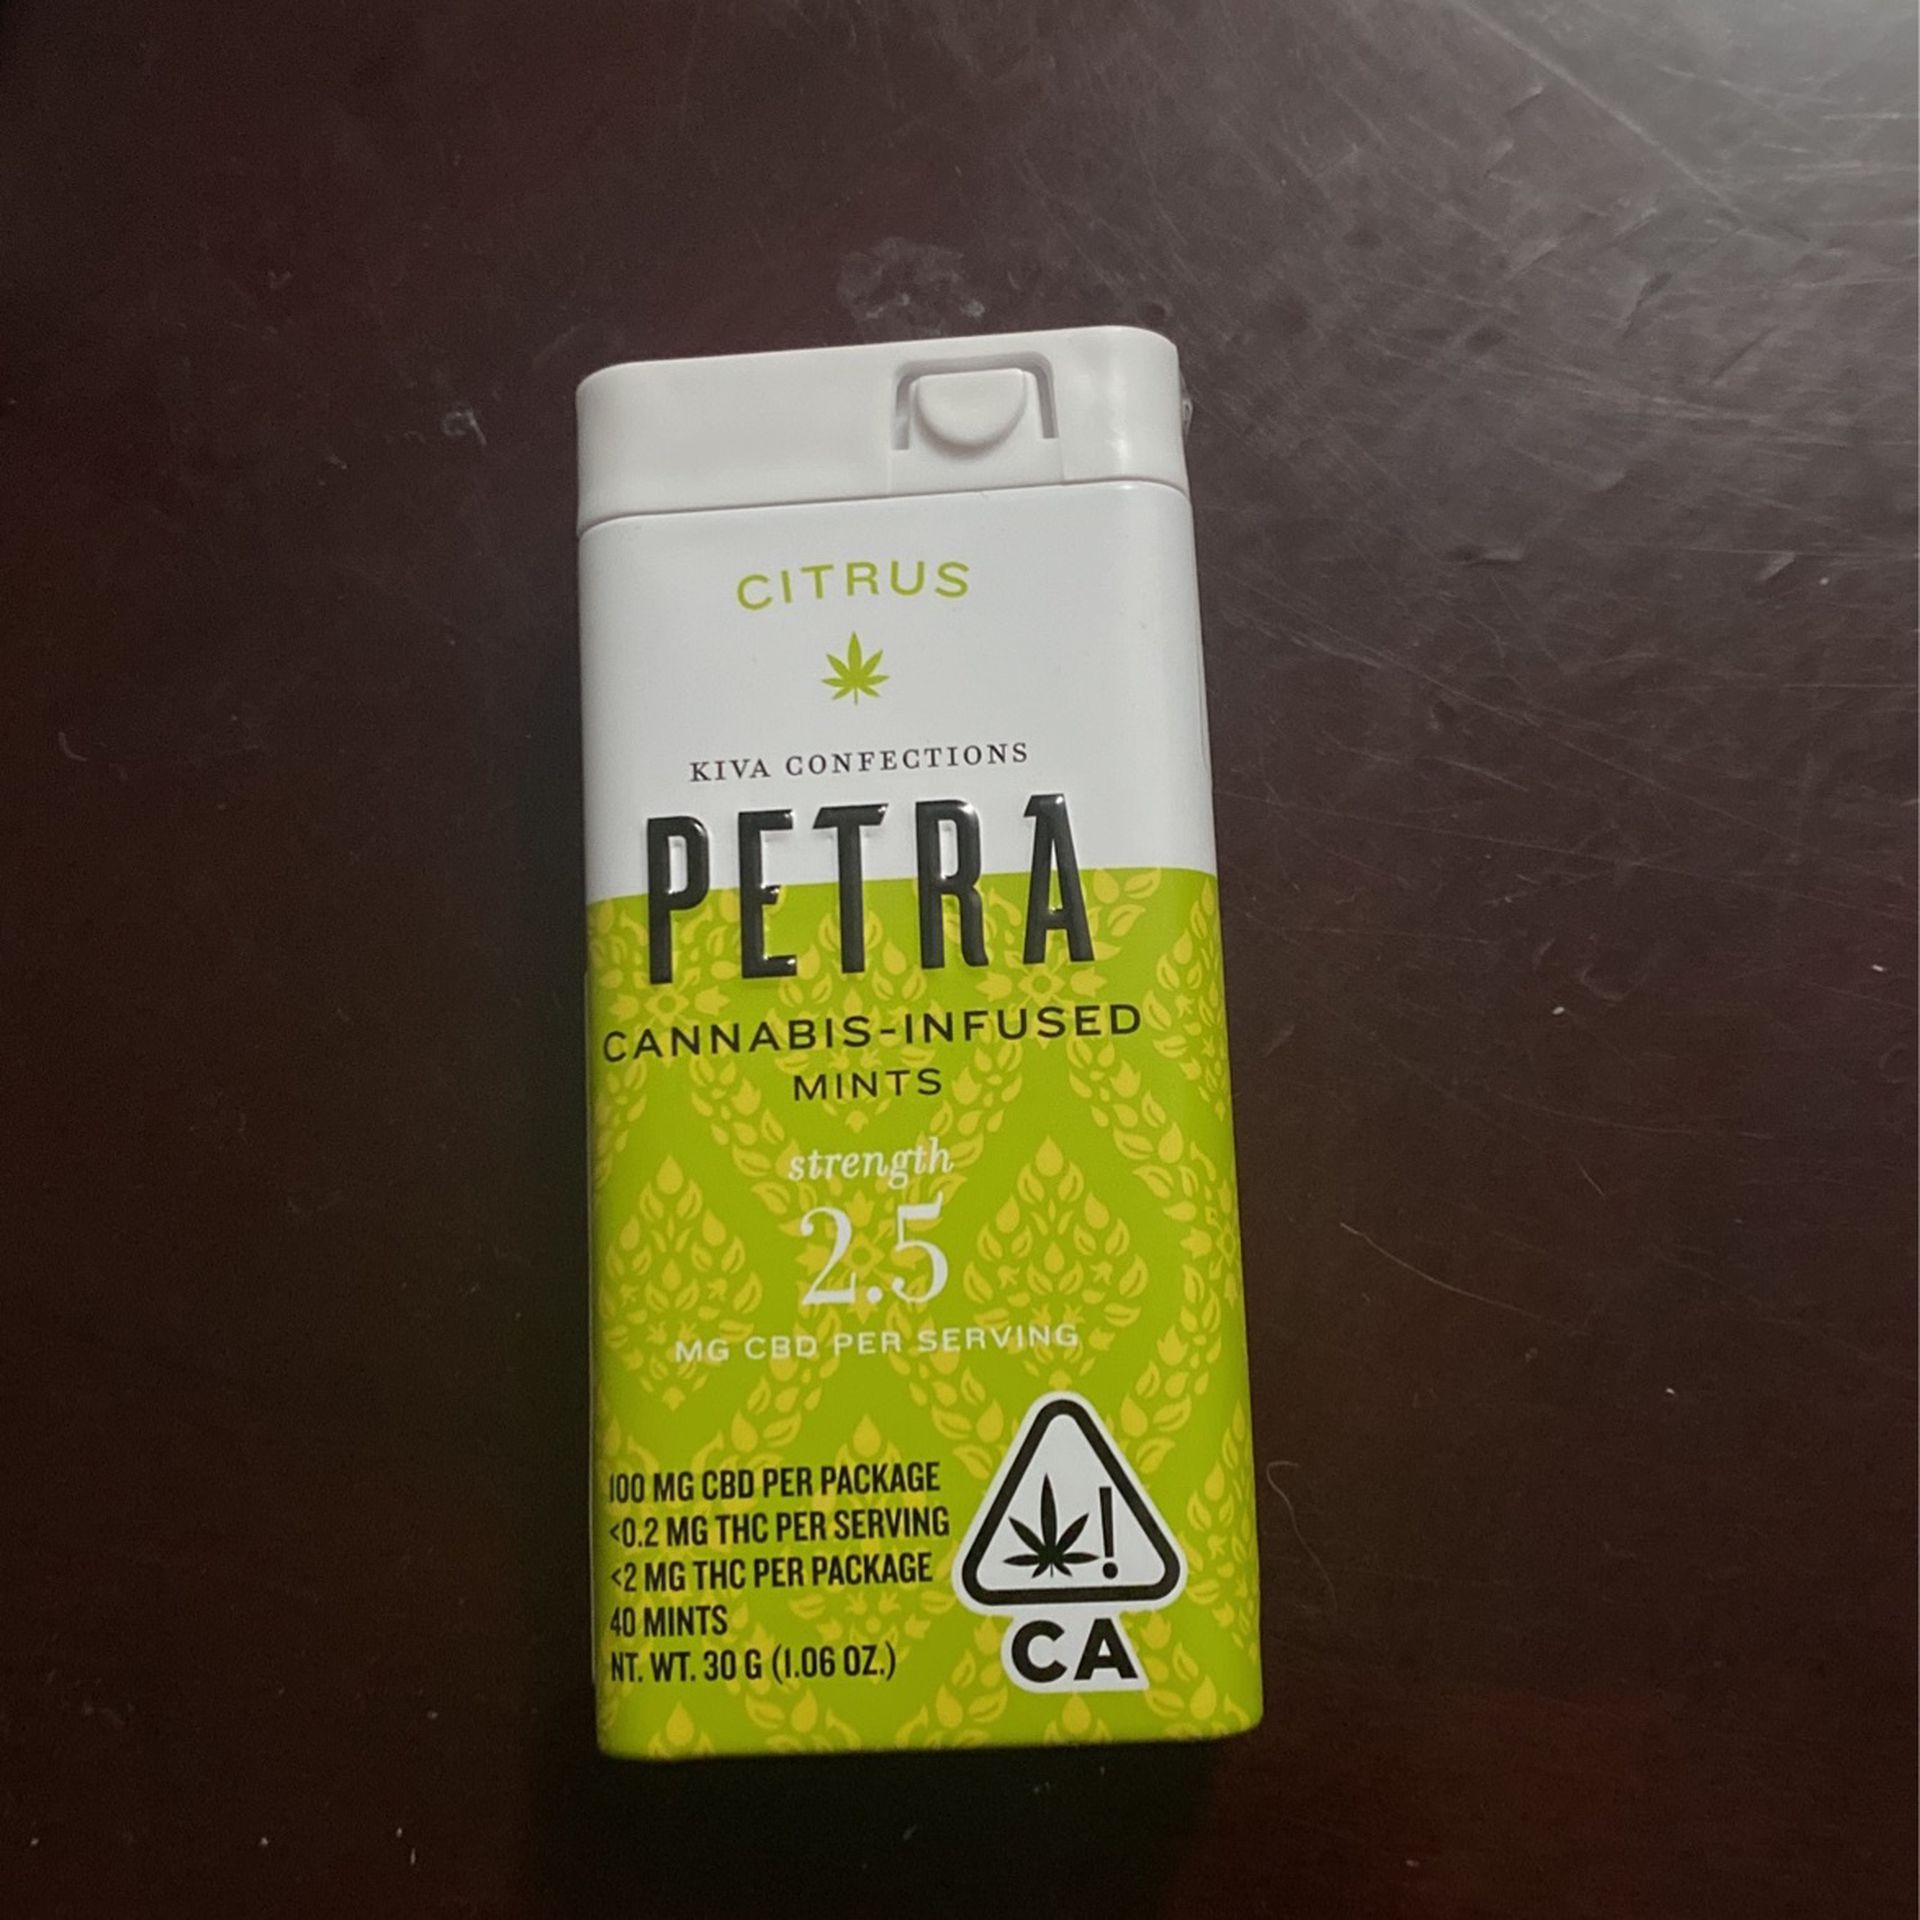 Cana is Infused Mints Petra Mints